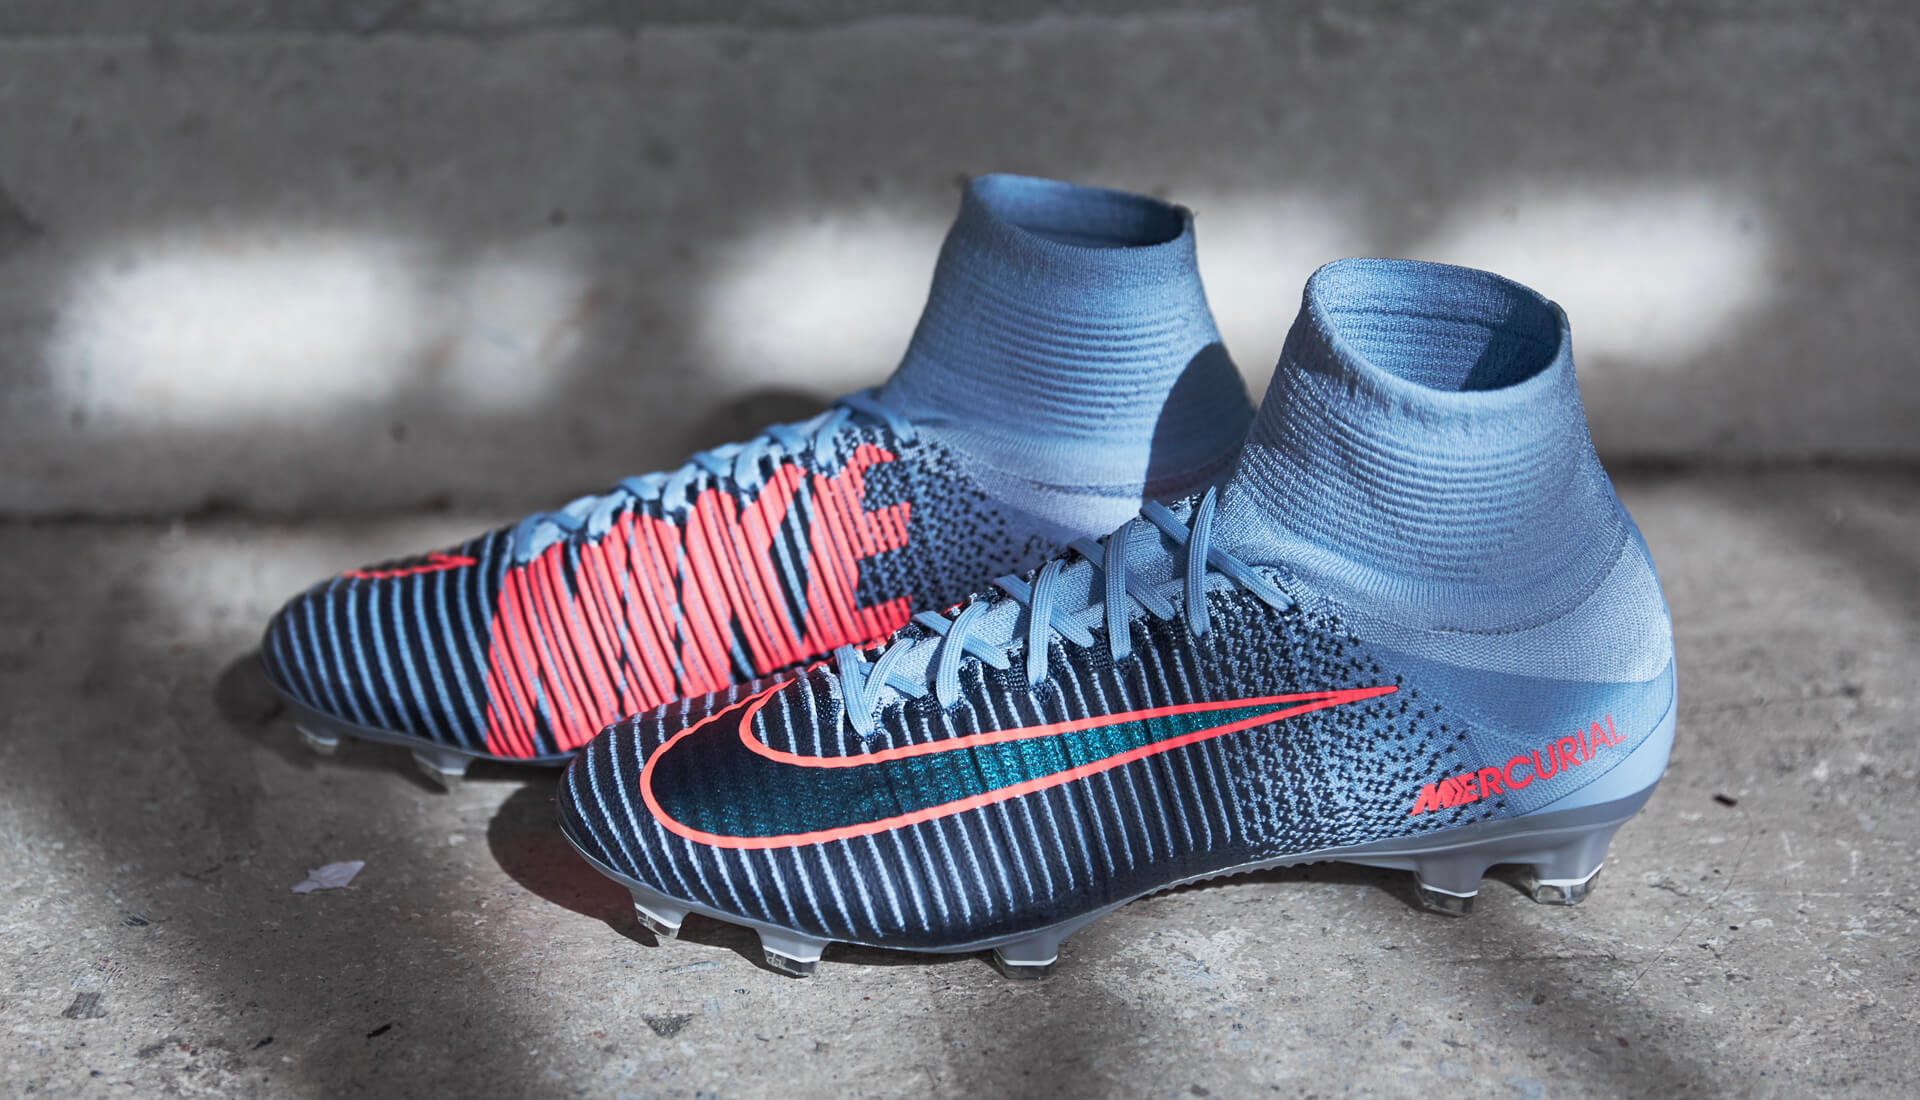 Nike Launch The Fast Football Boot Pack - SoccerBible